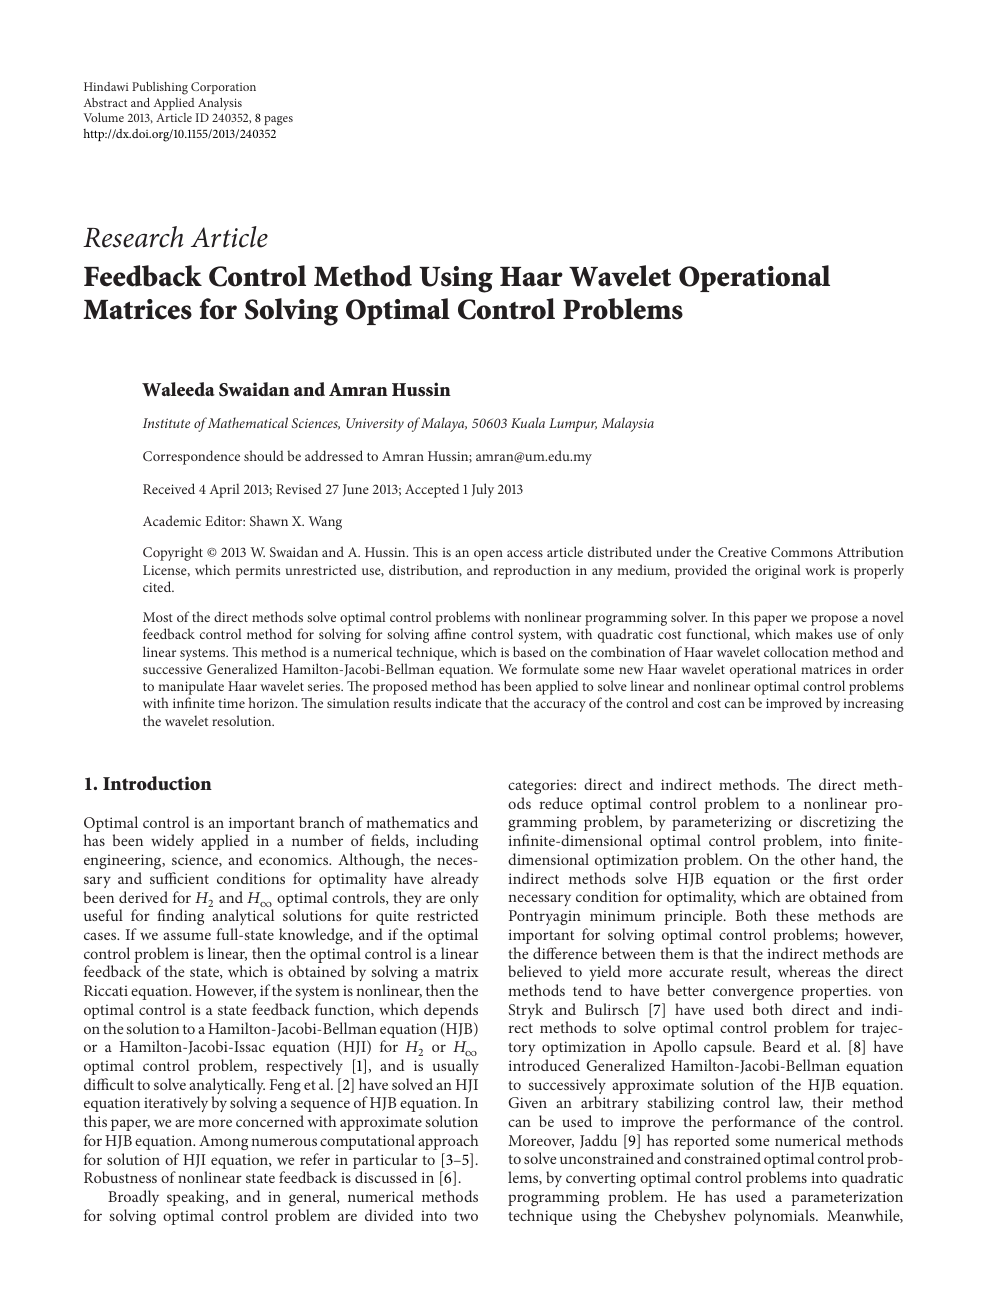 Feedback Control Method Using Haar Wavelet Operational Matrices For Solving Optimal Control Problems Topic Of Research Paper In Mathematics Download Scholarly Article Pdf And Read For Free On Cyberleninka Open Science